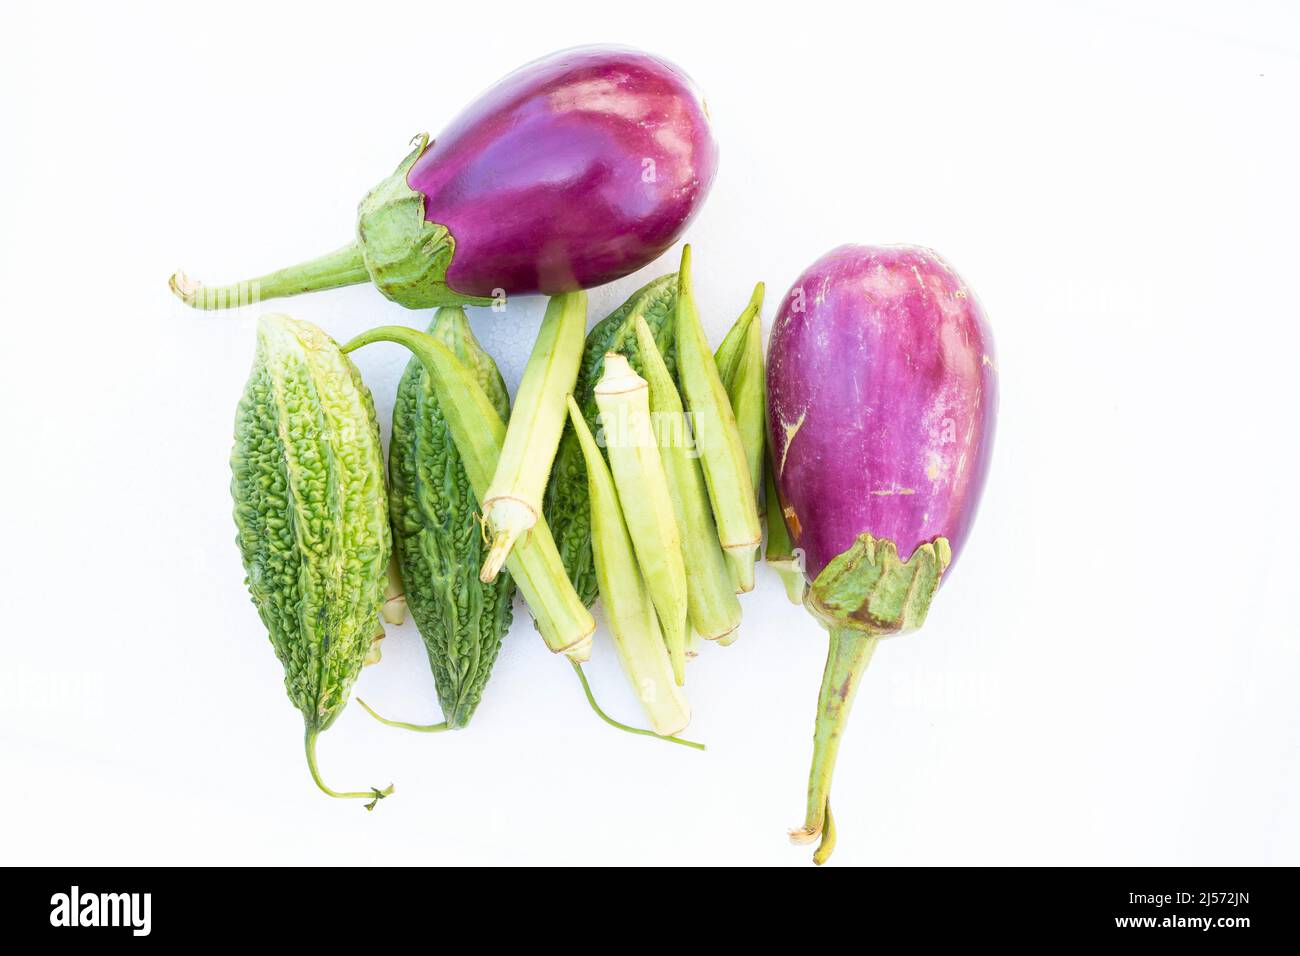 bitter gourd, okra and eggplants on white background. Stock Photo